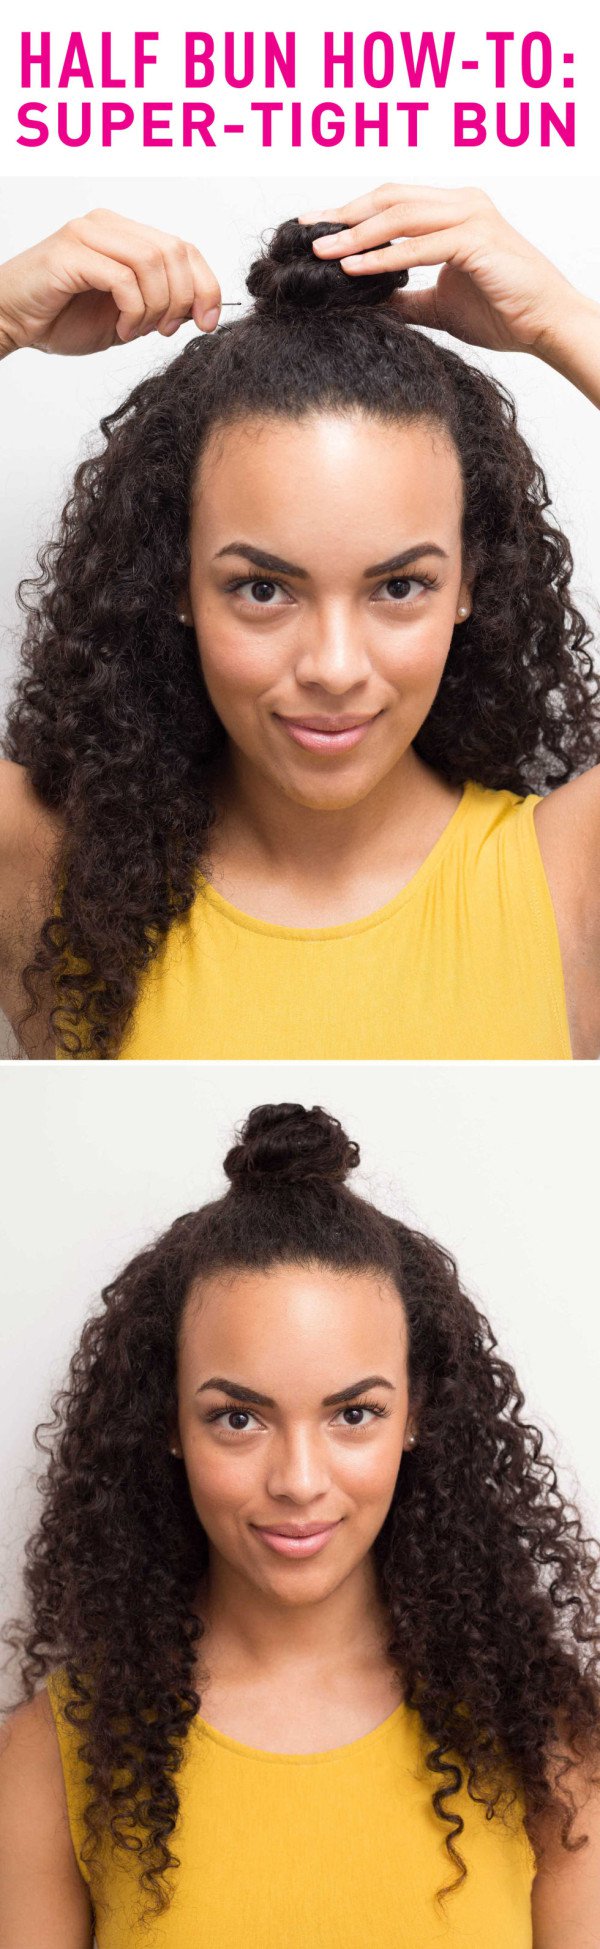 16 Cool Ways to Style Your Look With Half Bun Hairstyle